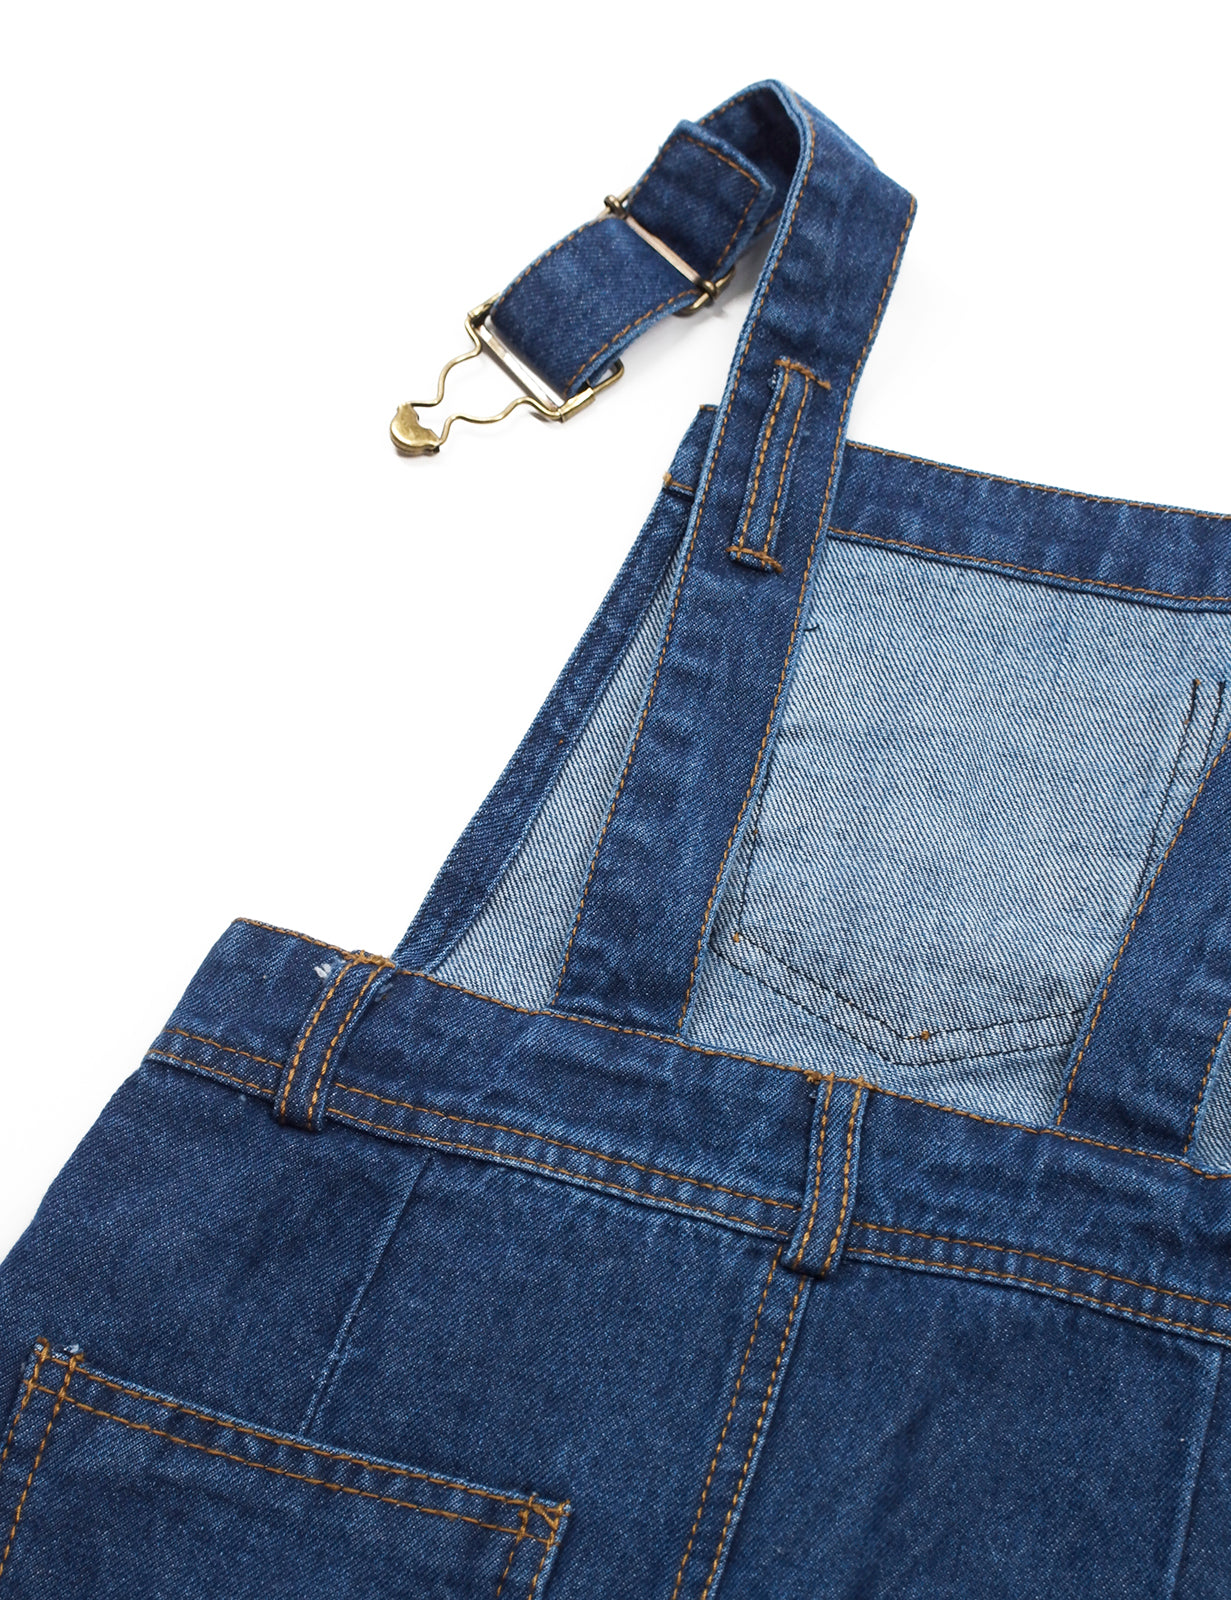 Boys Girls Jeans Overalls Baby Ripped Denim Workwear